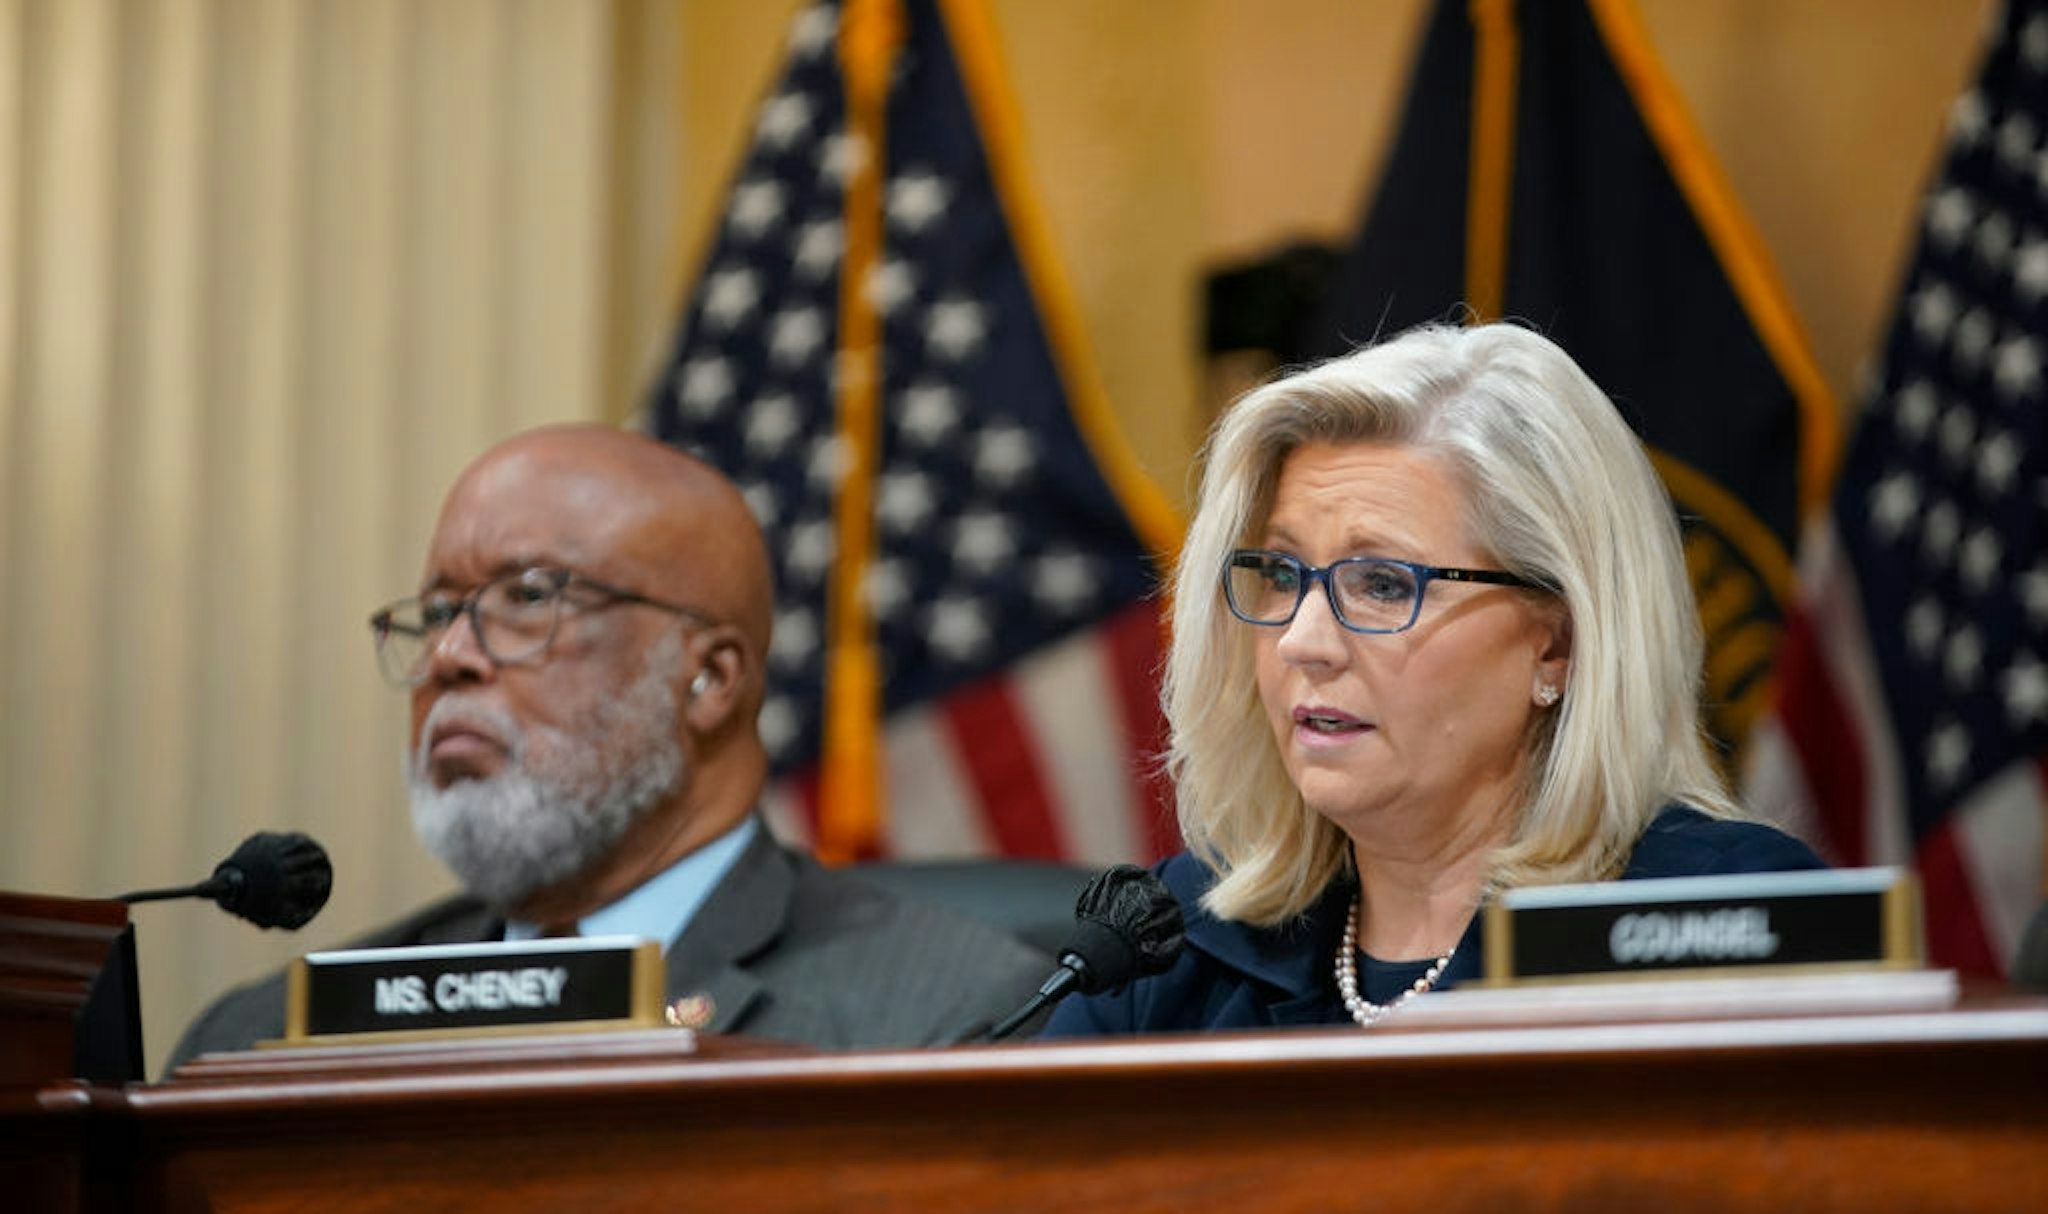 Representative Liz Cheney, a Republican from Wyoming, speaks during a hearing of the Select Committee to Investigate the January 6th Attack on the US Capitol in Washington, D.C., US, on Tuesday, June 28, 2022. Cassidy Hutchinson, who previously gave videotaped depositions offering insider details on the final days of Donald Trump's presidency, is appearing before the committee on short notice while most of Congress is on a two-week break. Photographer: Al Drago/Bloomberg